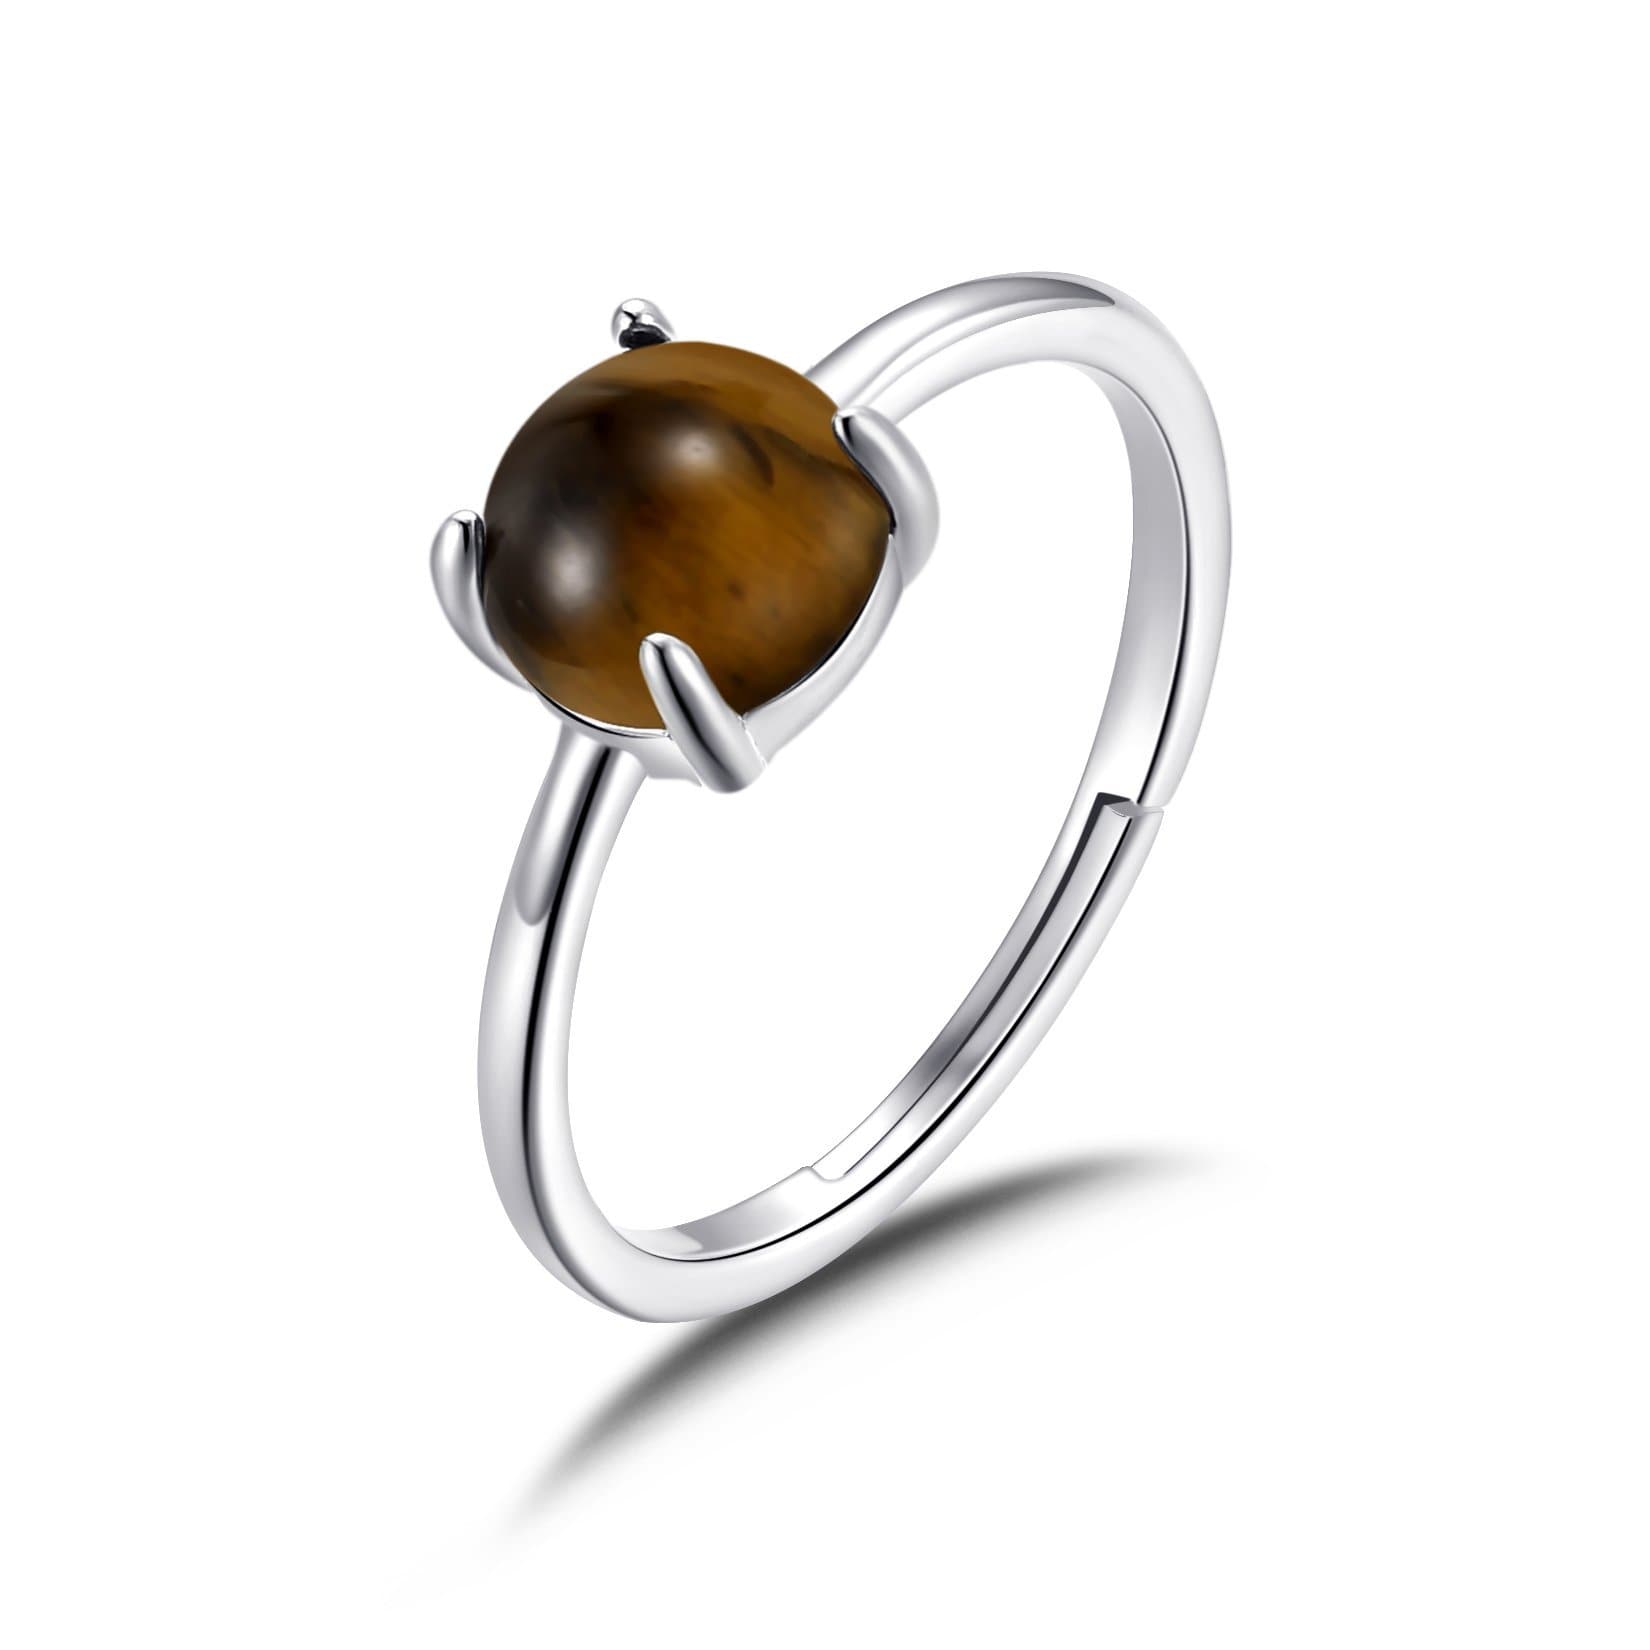 Tigers Eye Ring with Quote Card